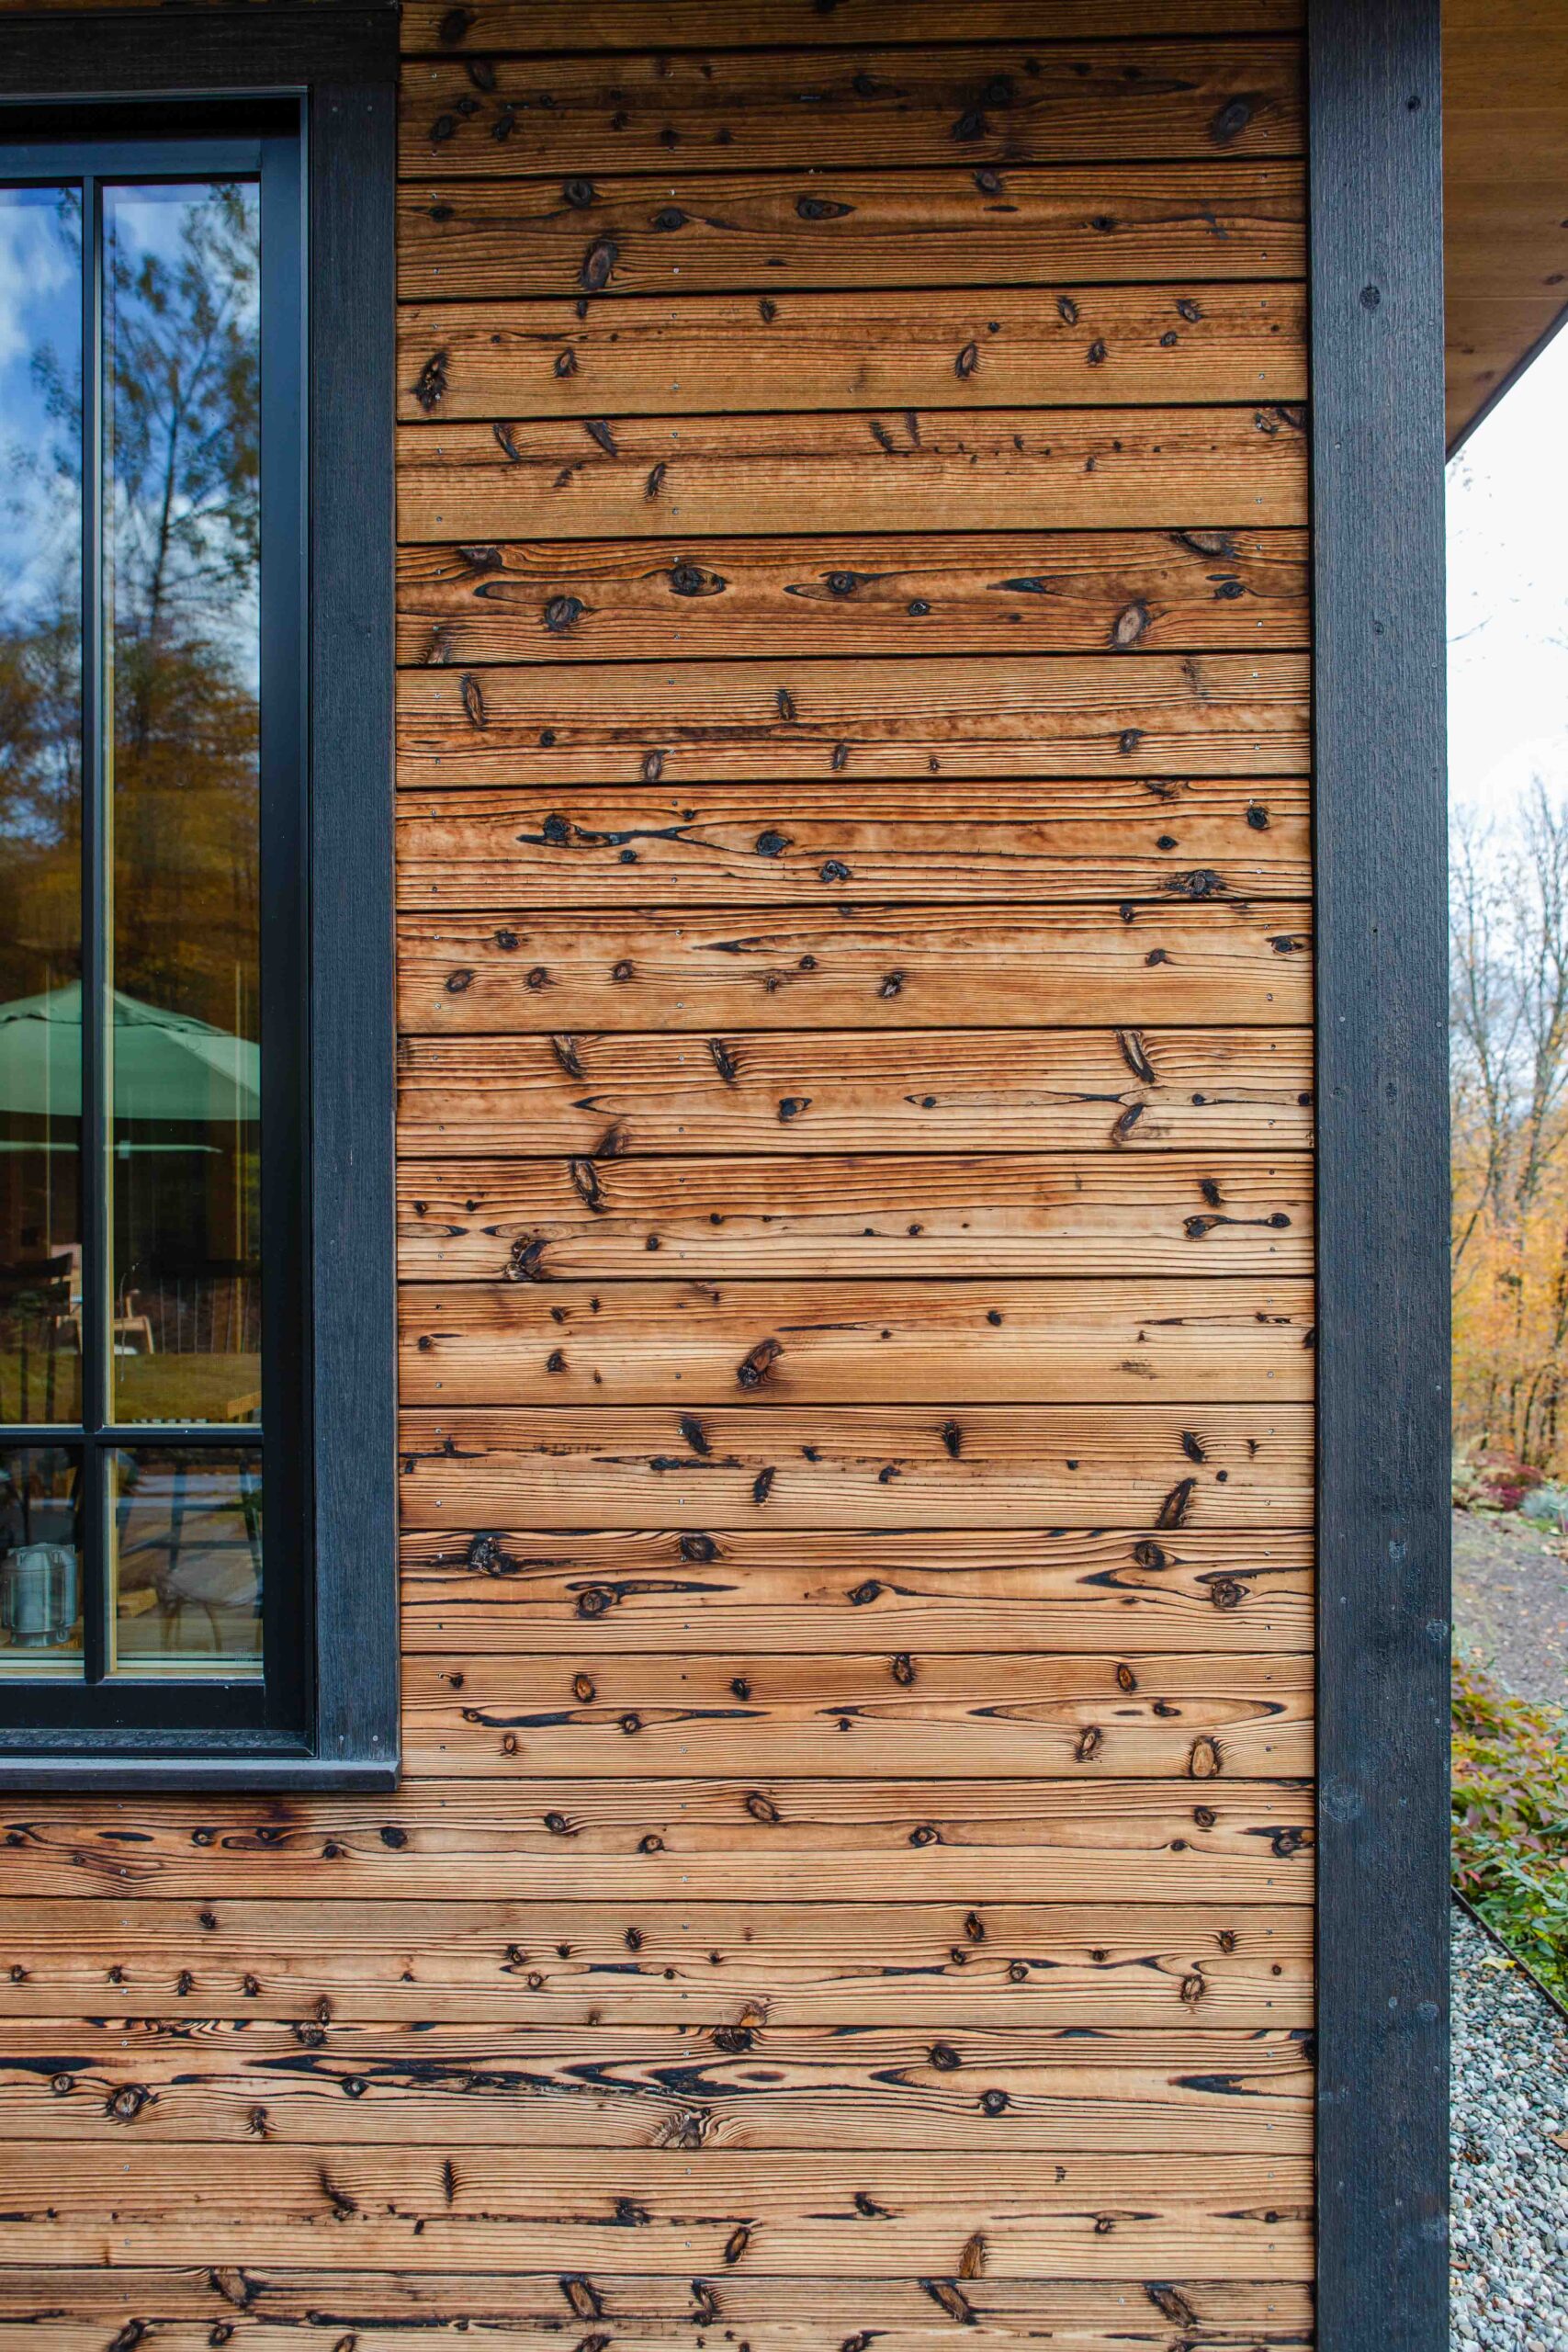 East West House: Nakamoto Forestry Unoiled Gendai Shou Sugi Ban Project in Vermont